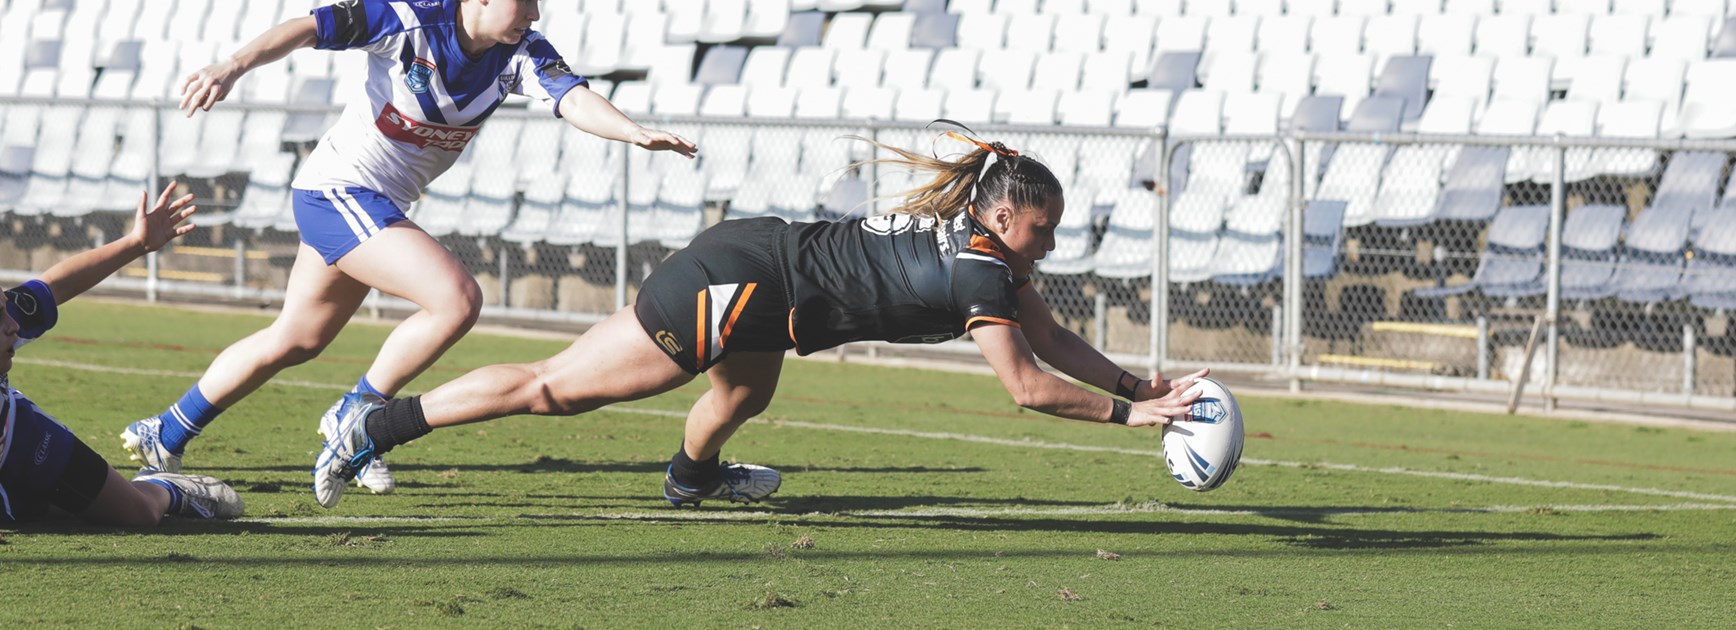 Wests Tigers women defeat Bulldogs in Elimination Final